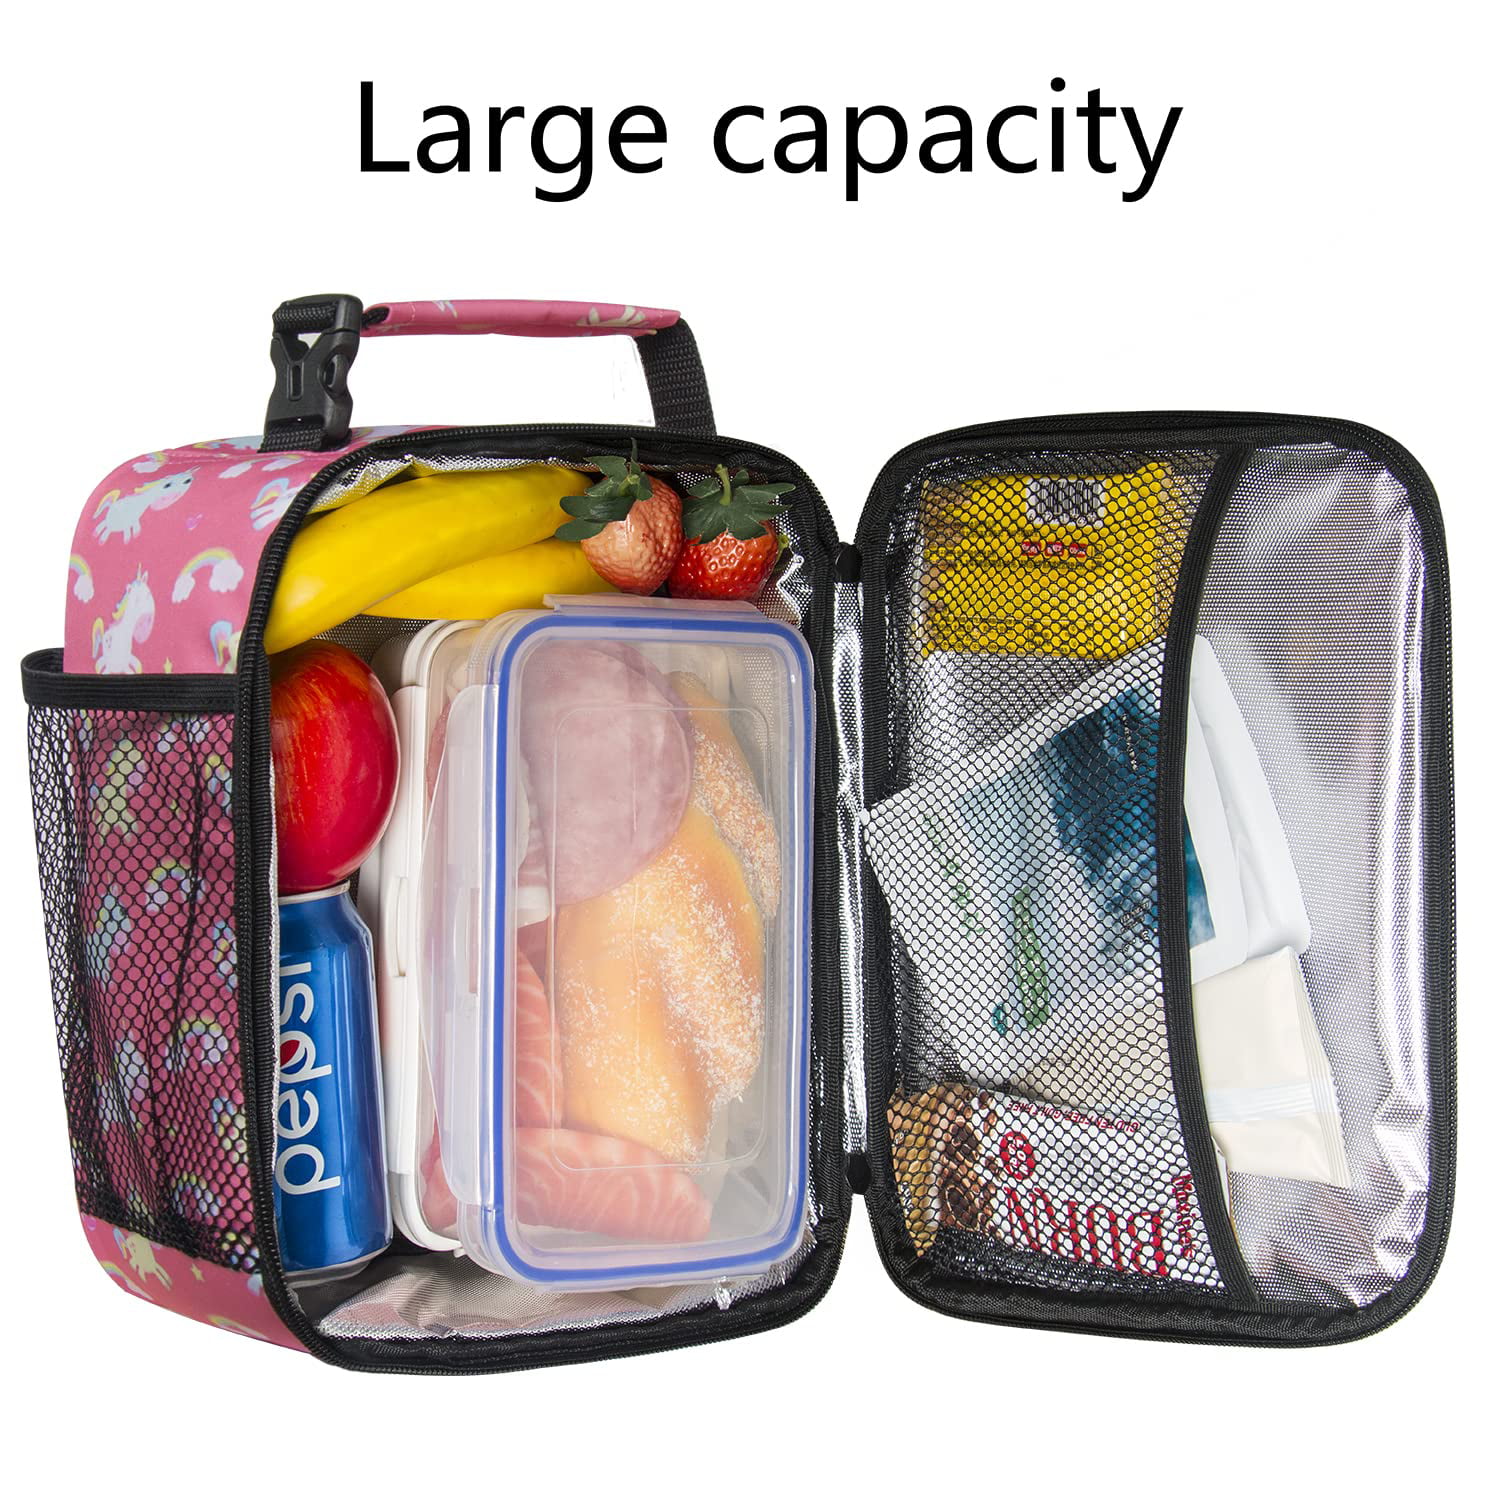 Best Hap Tim Insulated Lunch Bag Women Girls, Reusable Lunch Box Kids Girls,  Spacious Lunchbox Adult Cooler Bag (18654-PK) at shop diaper backpack, lunch  box, laptop backpack, picnic backpack, cooler bag and